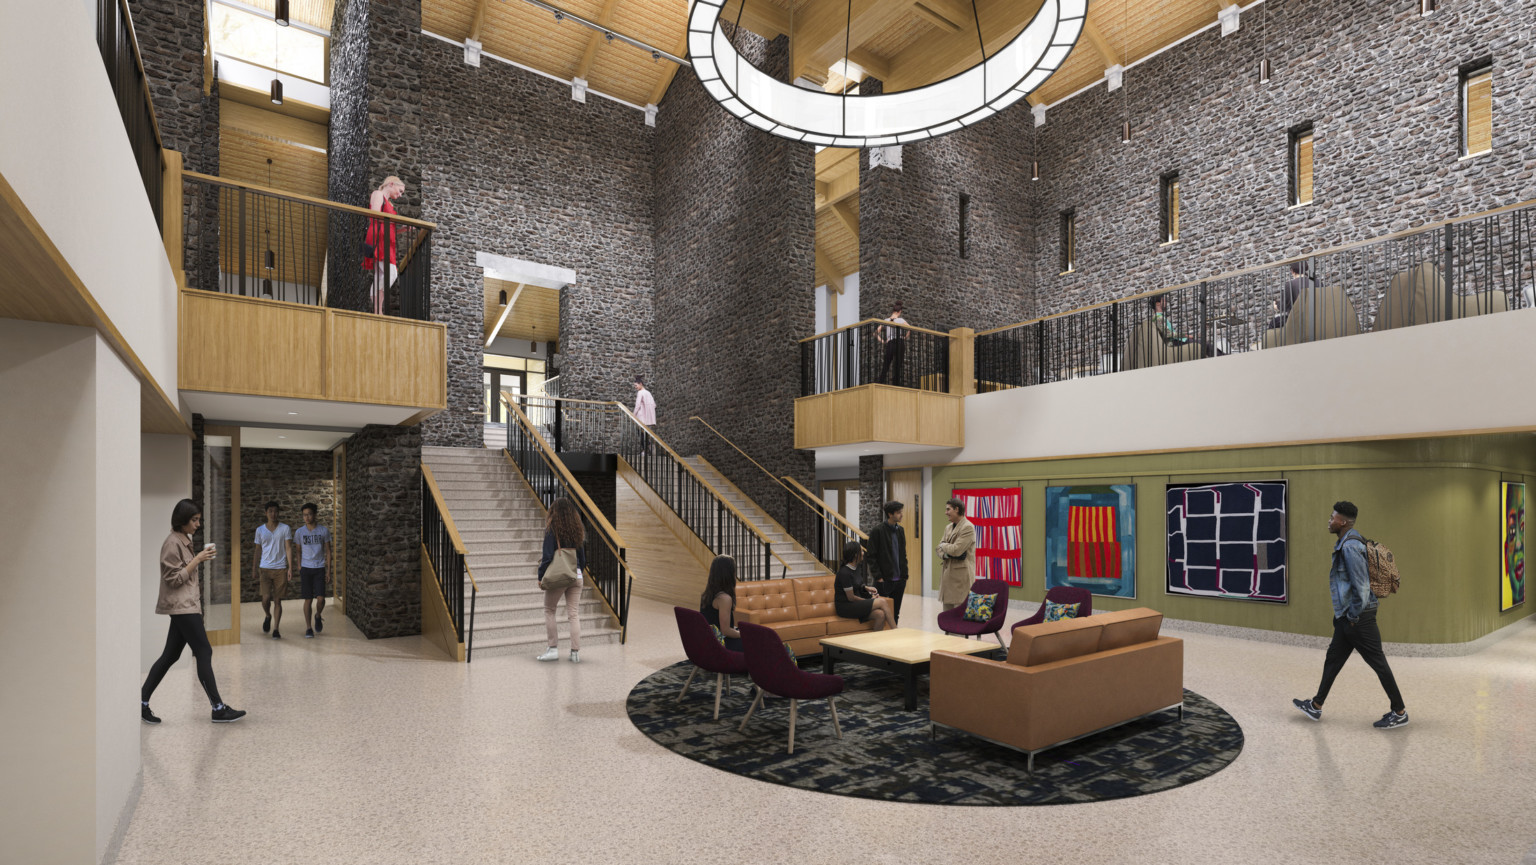 Atrium with large circular chandelier above 1st floor seating area with green wall, 2nd floor walkway with exposed brick